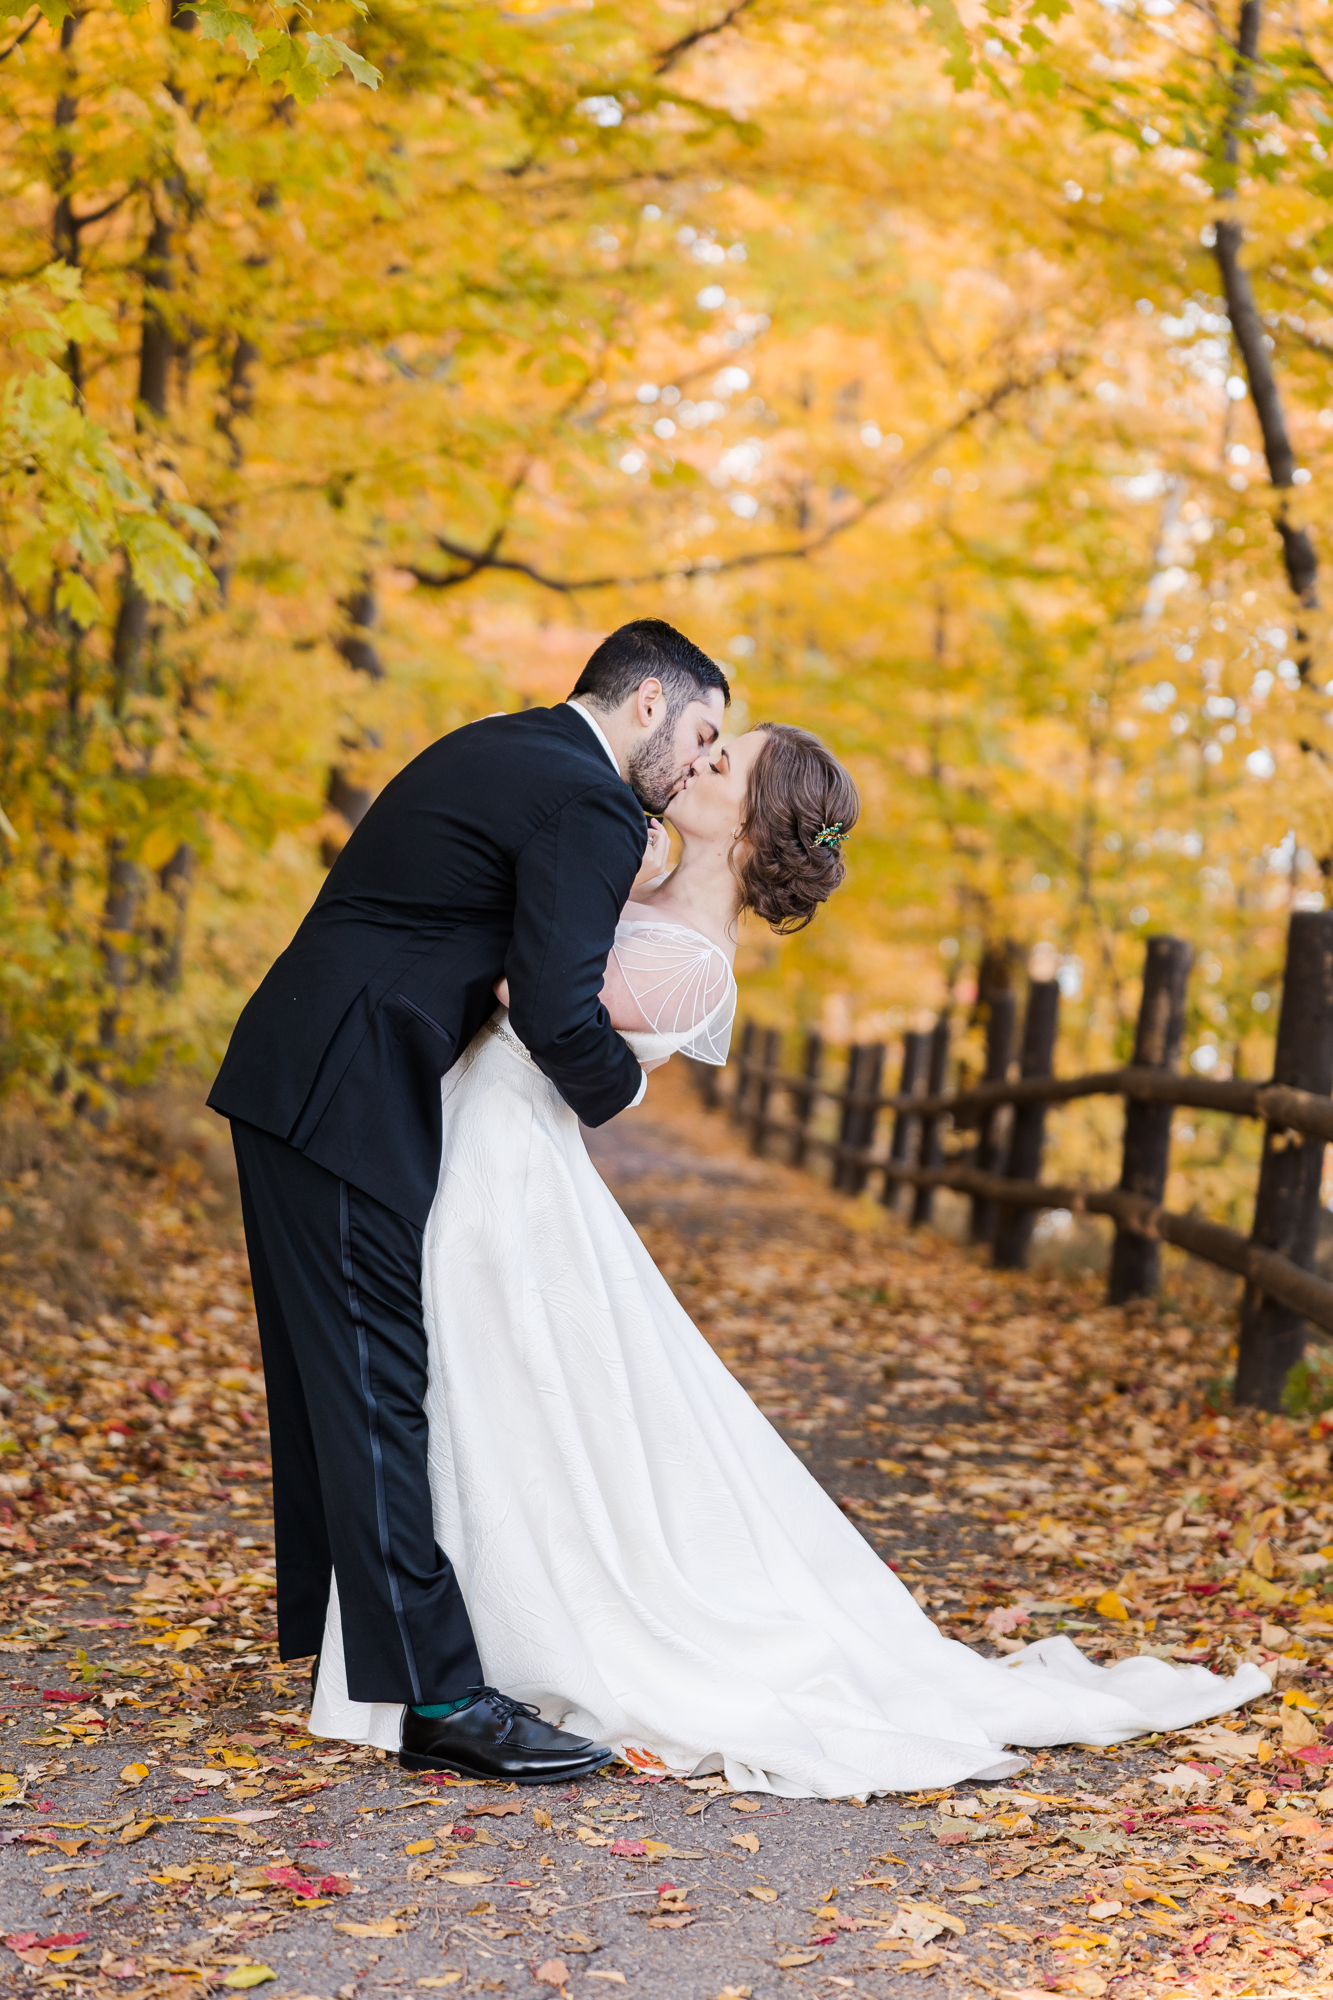 Radiant Gate House Wedding in Fall